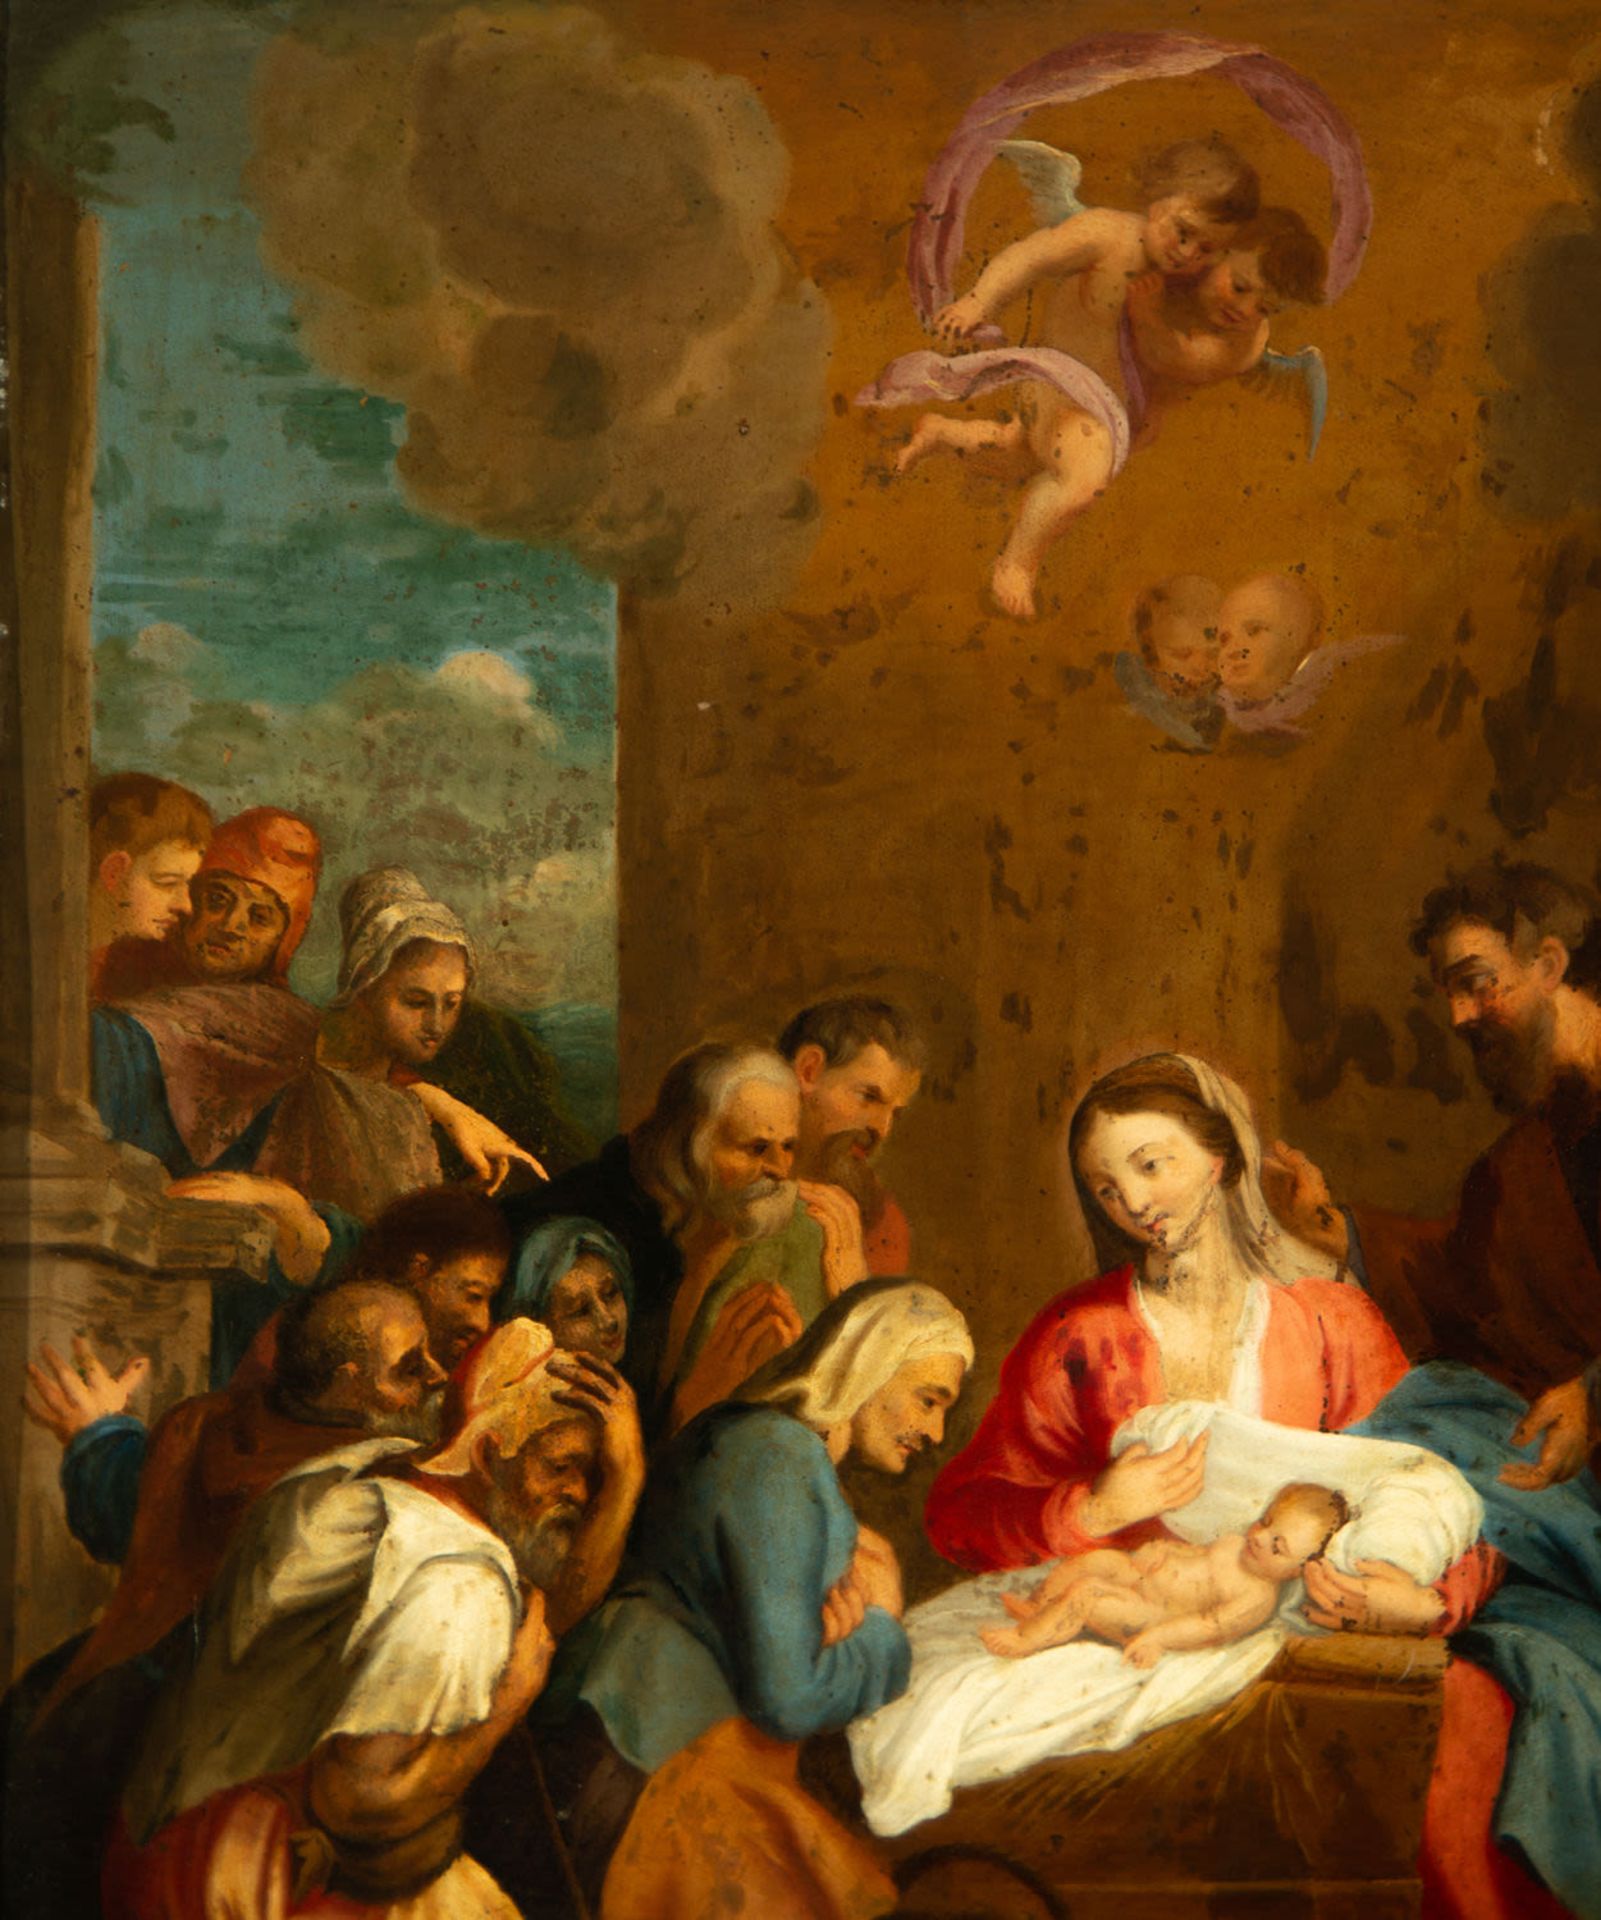 The Adoration of the Shepherds, Spanish school of the 17th century - Image 2 of 7